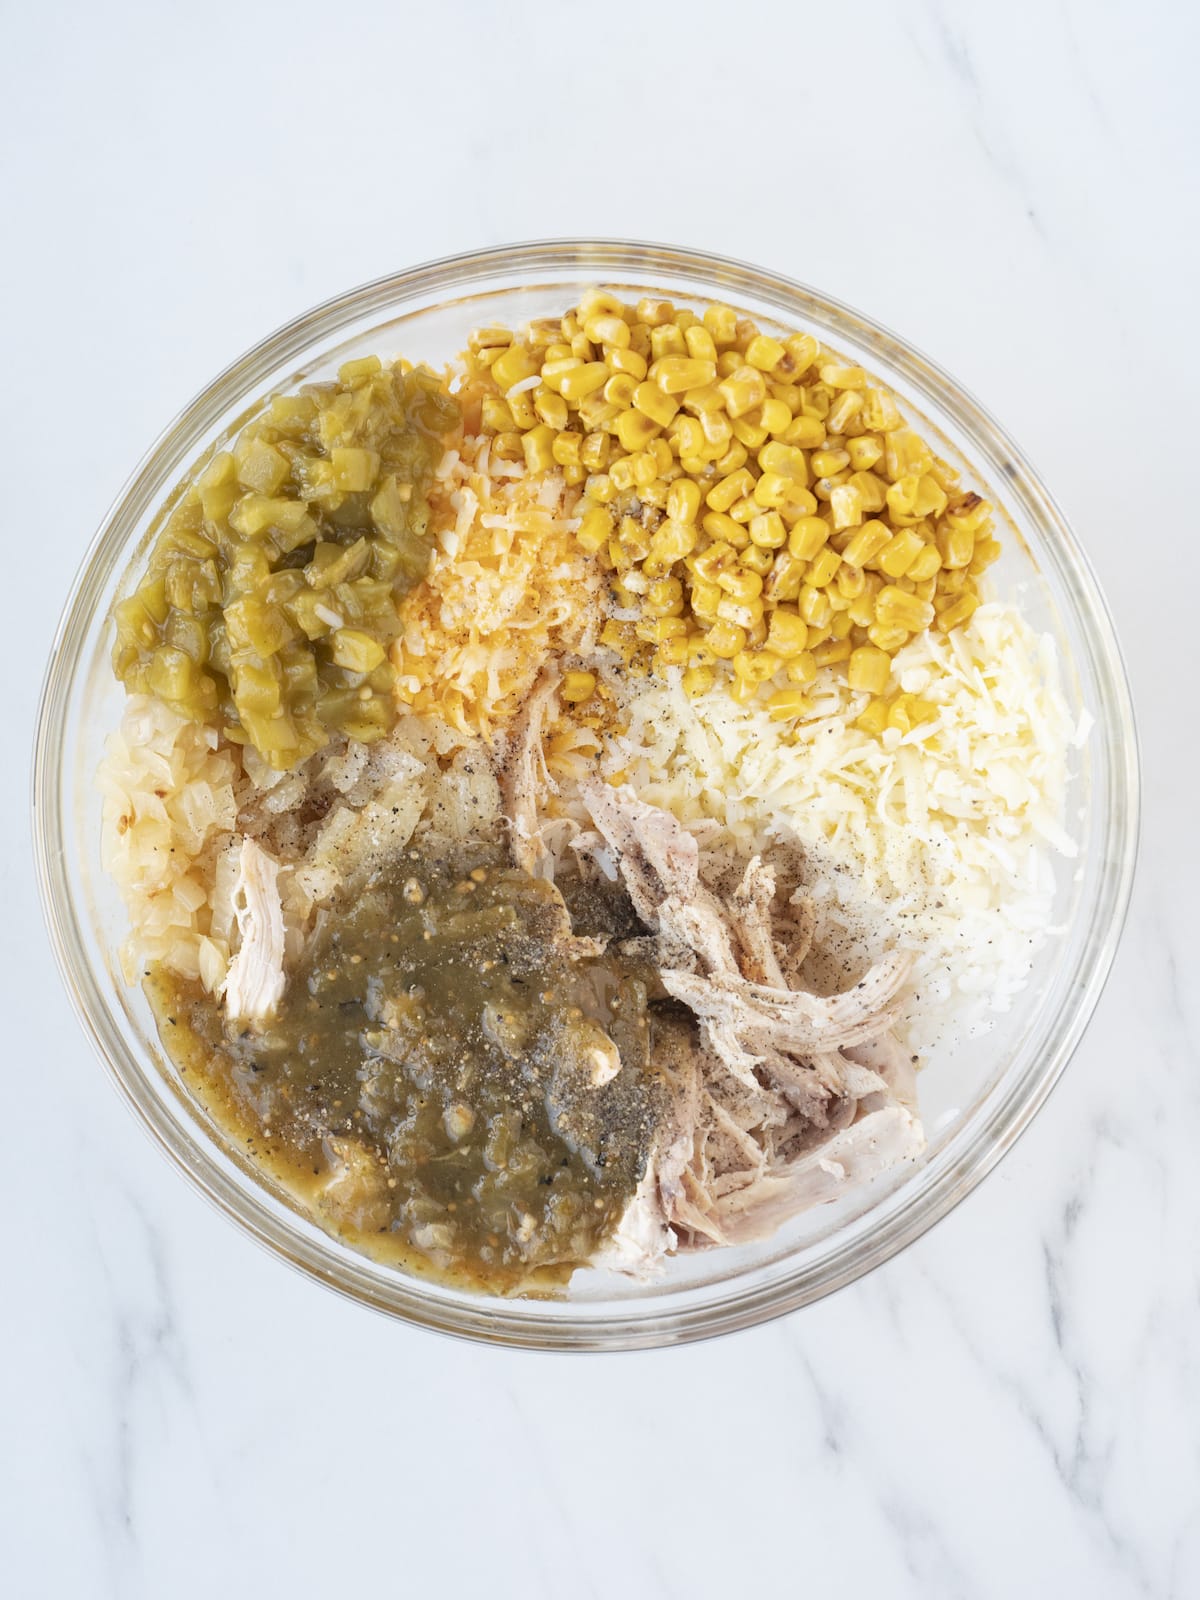 A large glass mixing bowl, with cooked rice in the bottom, topped with corn, chopped onions, shredded mozzarella and colby jack cheeses, shredded chicken, green chiles and tomatillo salsa, sprinkled with salt and black pepper.